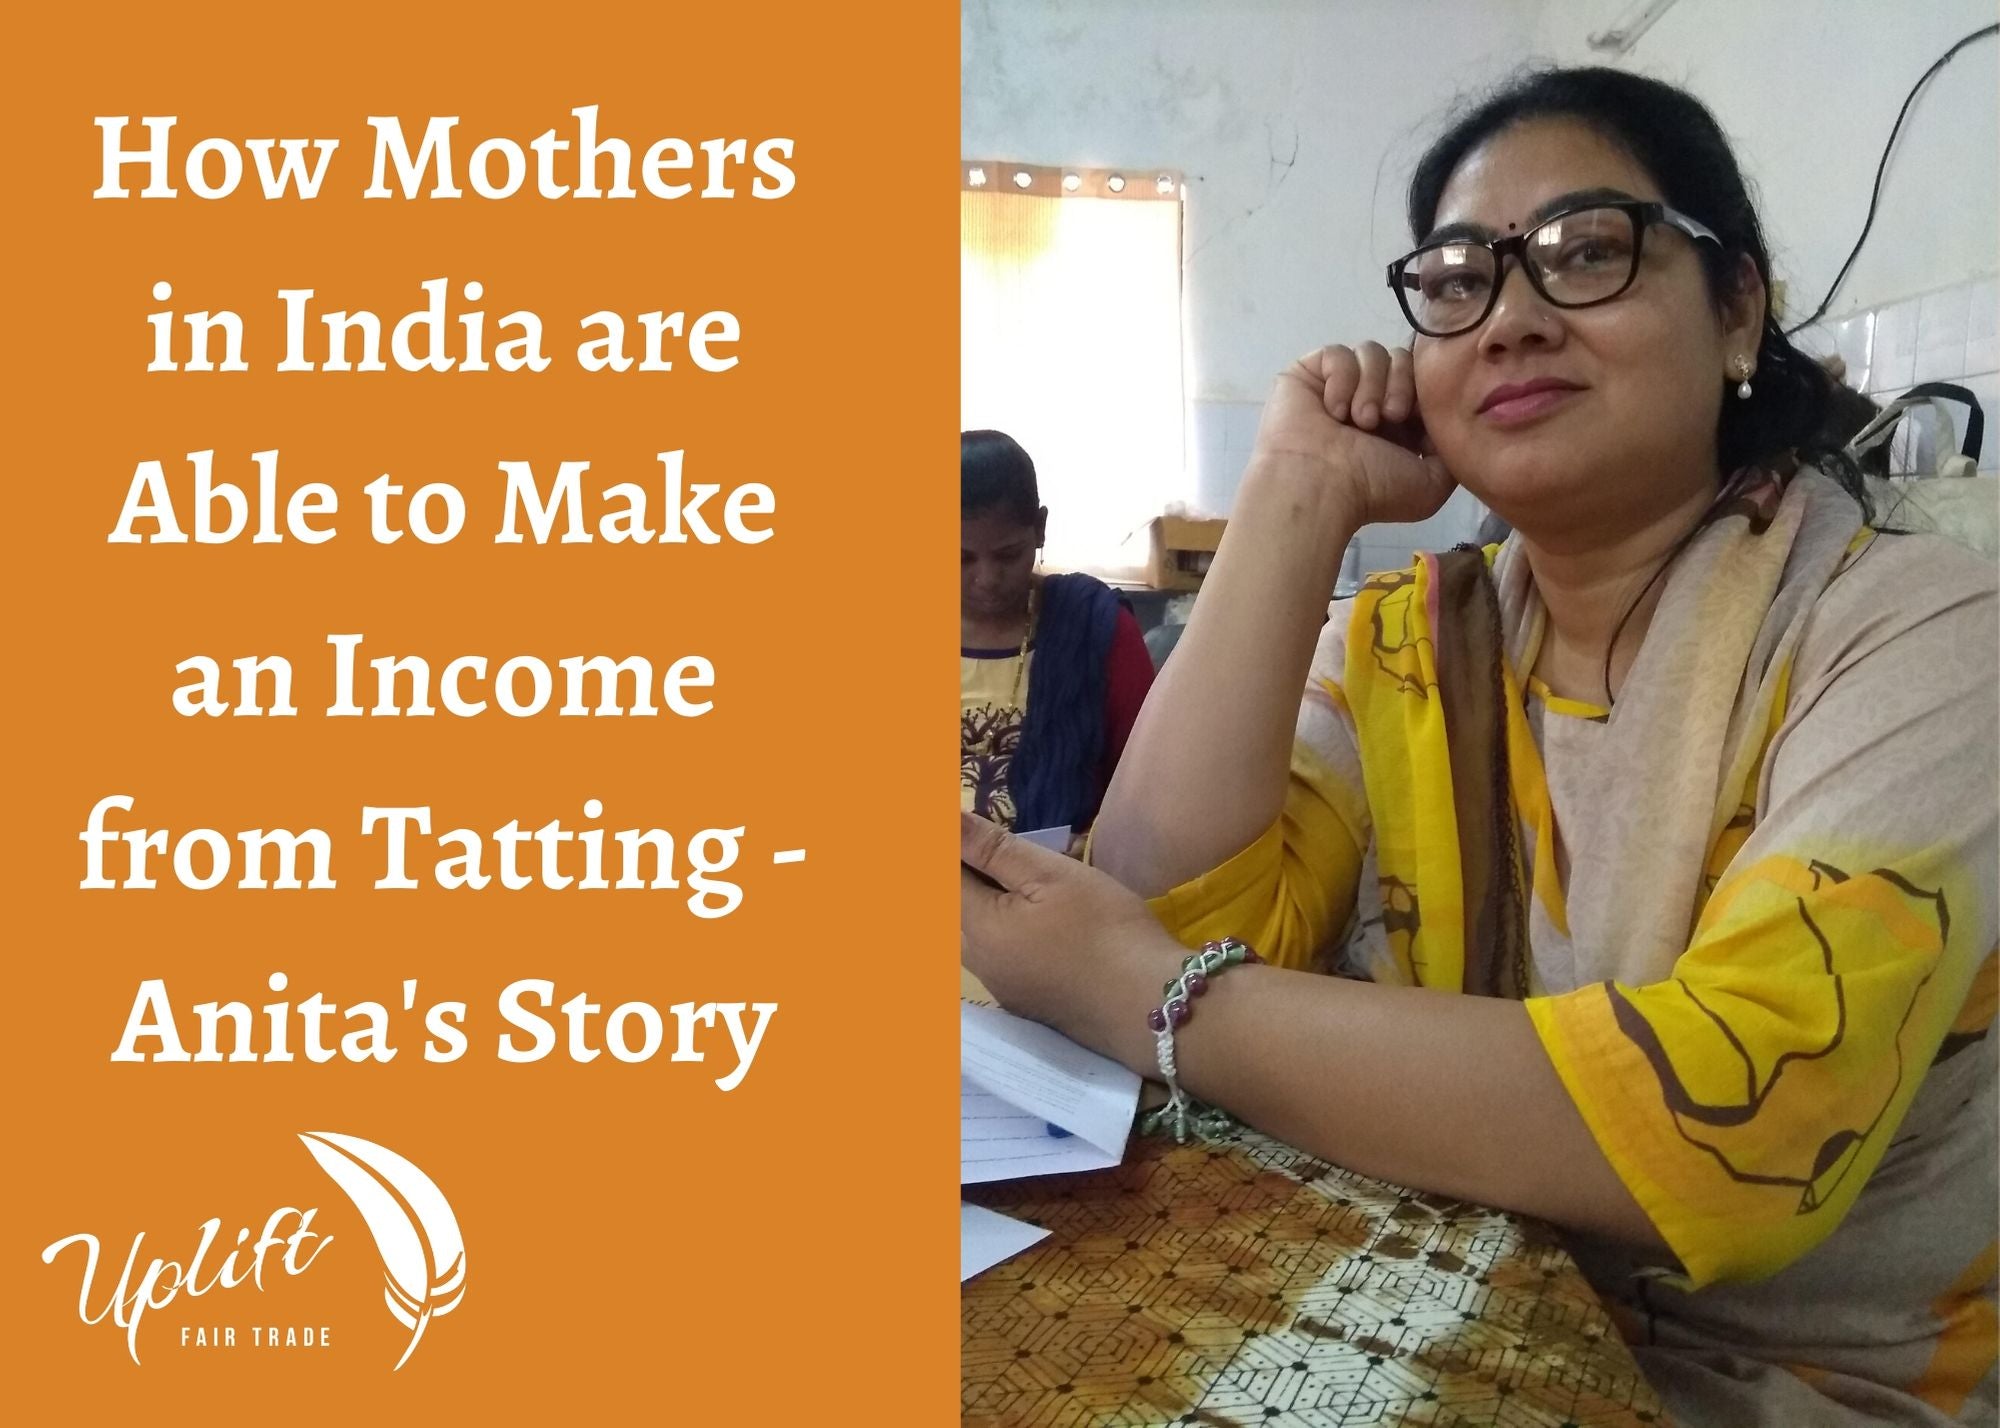 How Mothers in India are Able to Make an Income from Tatting - Anita's Story